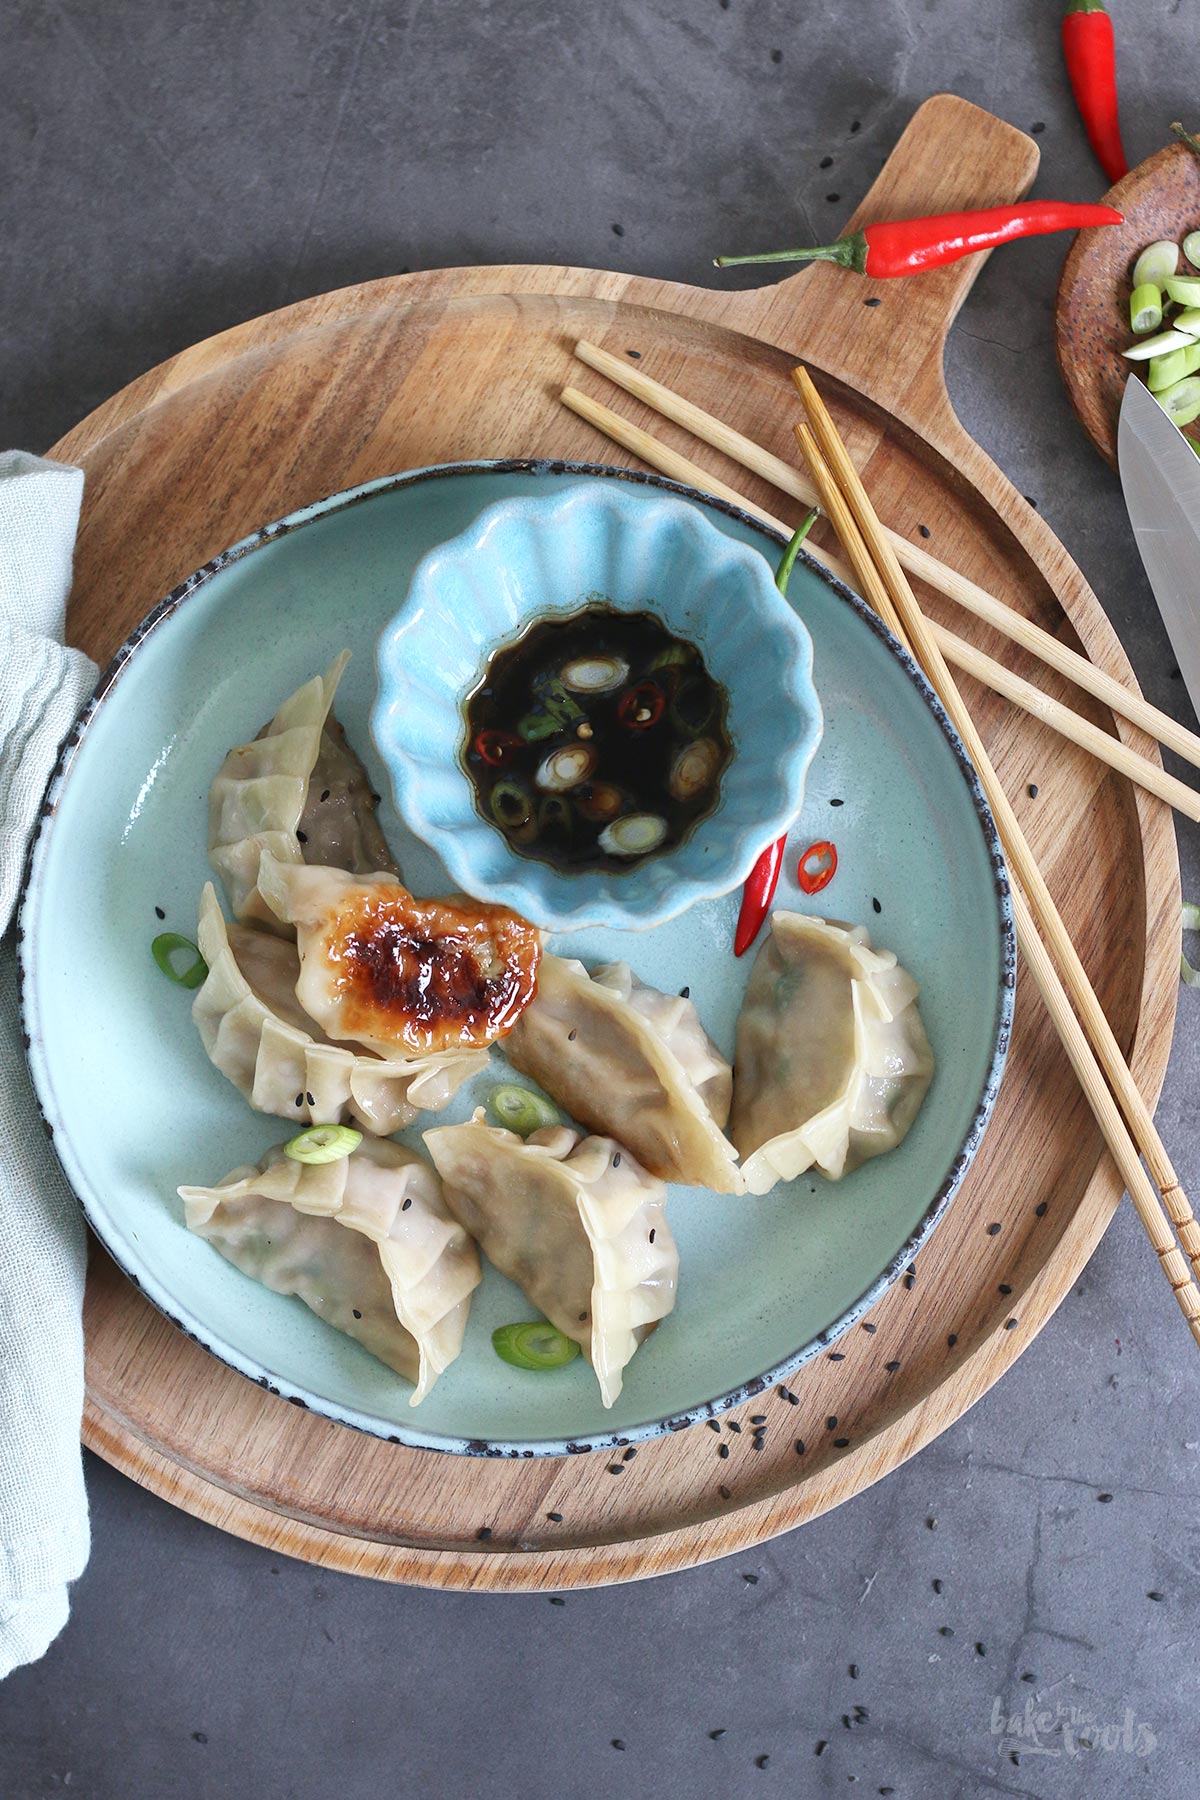 Potstickers with Pork and Napa Cabbage | Bake to the roots